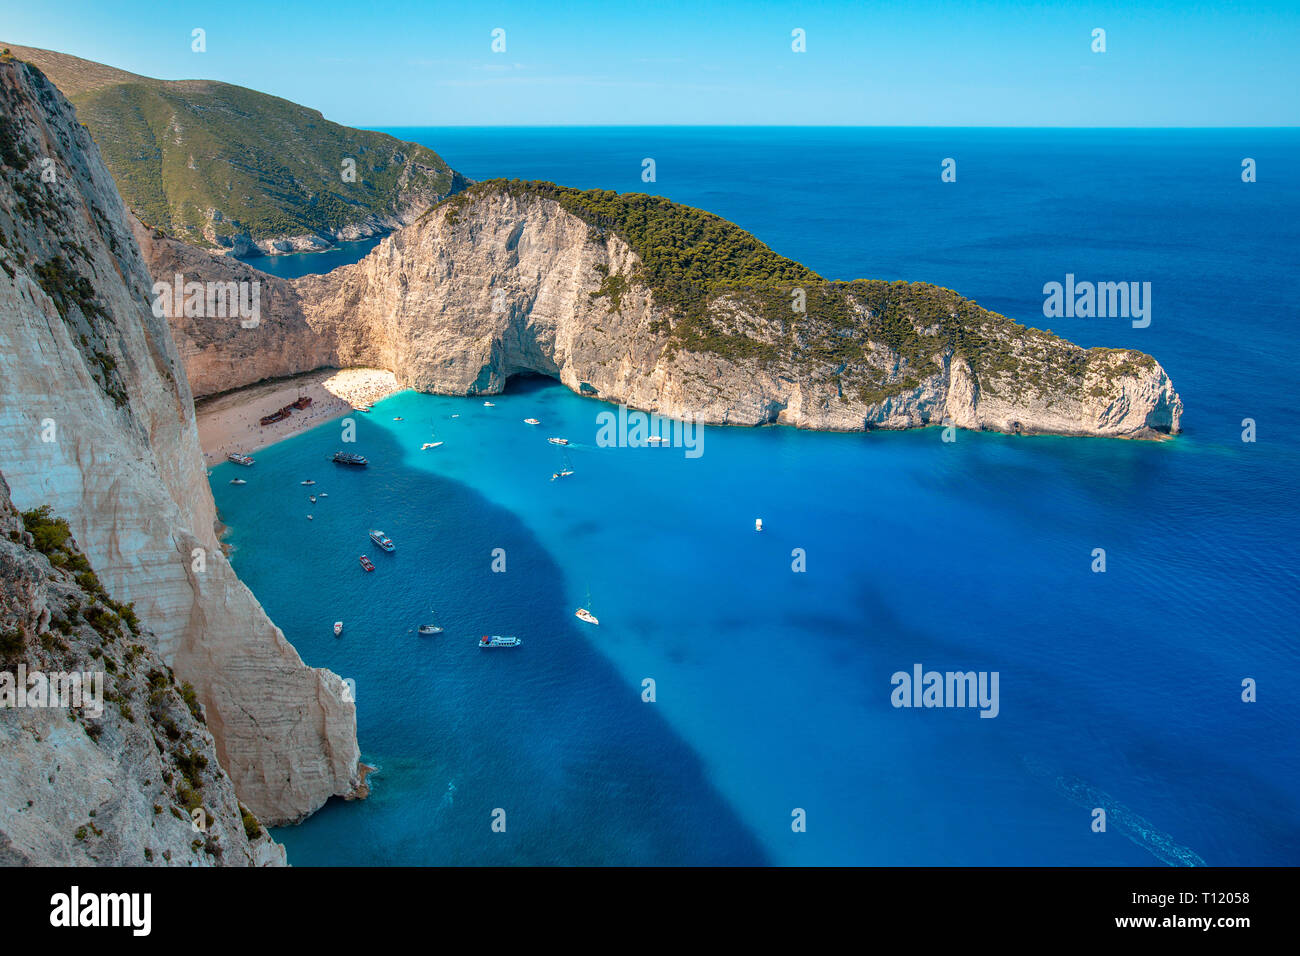 The amazing Navagio beach in Zakynthos, Greece, with the famous wrecked ship Stock Photo